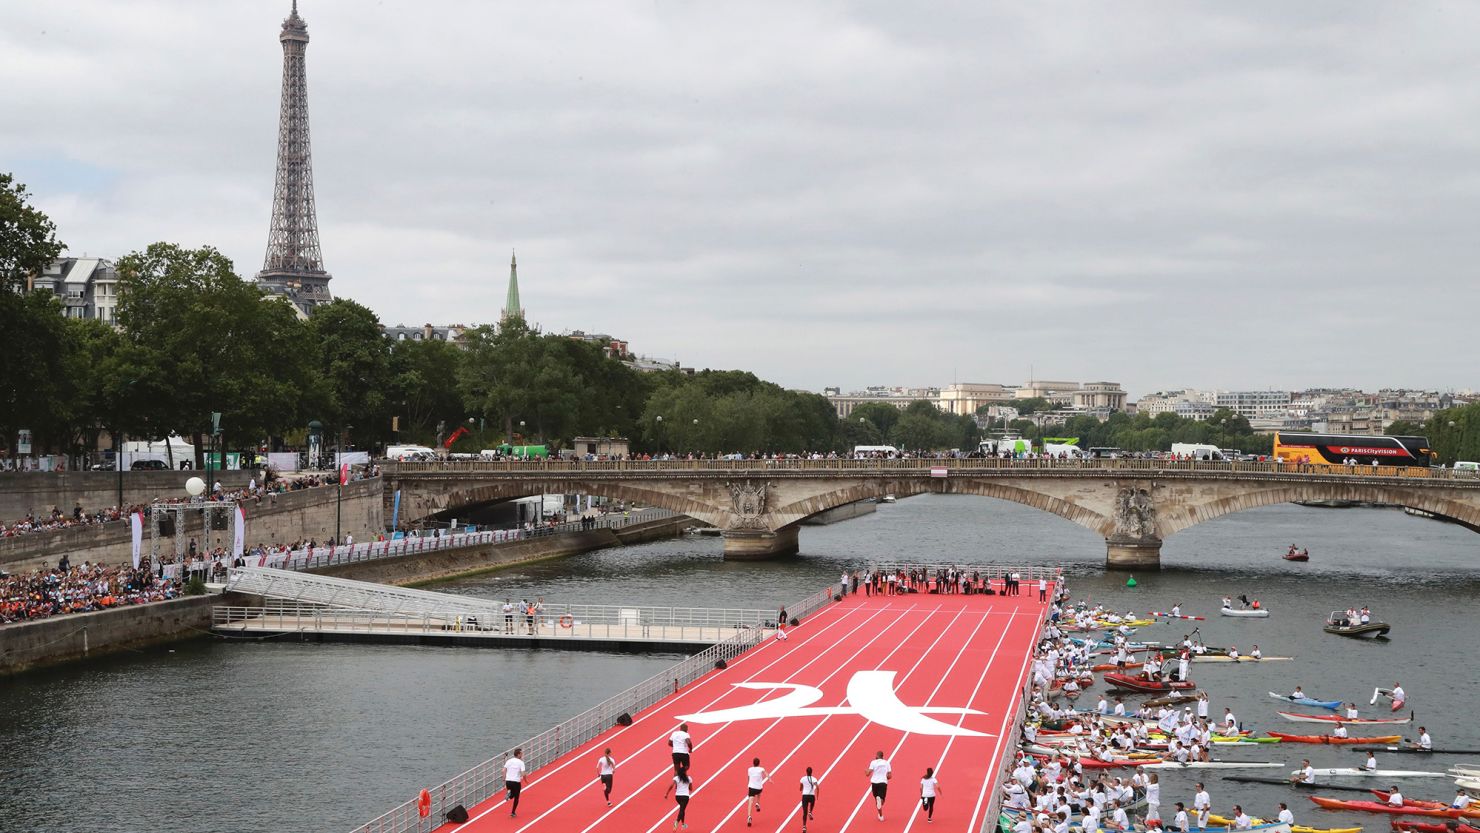 Paris 2024 is currently set to host the first Opening Ceremony along a river.